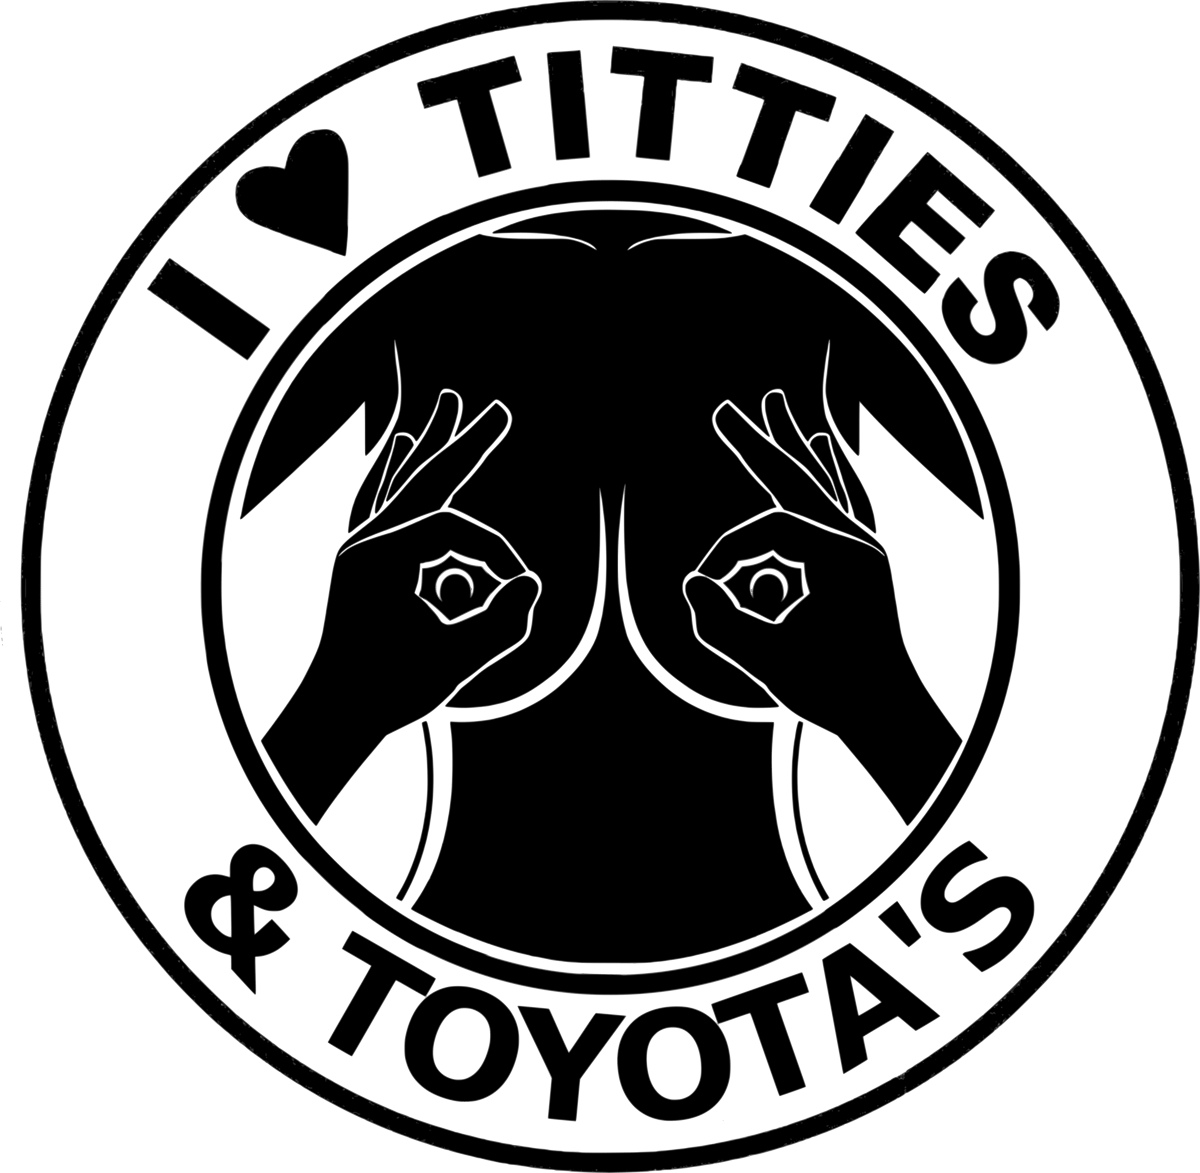 I Love Titties And Toyotas